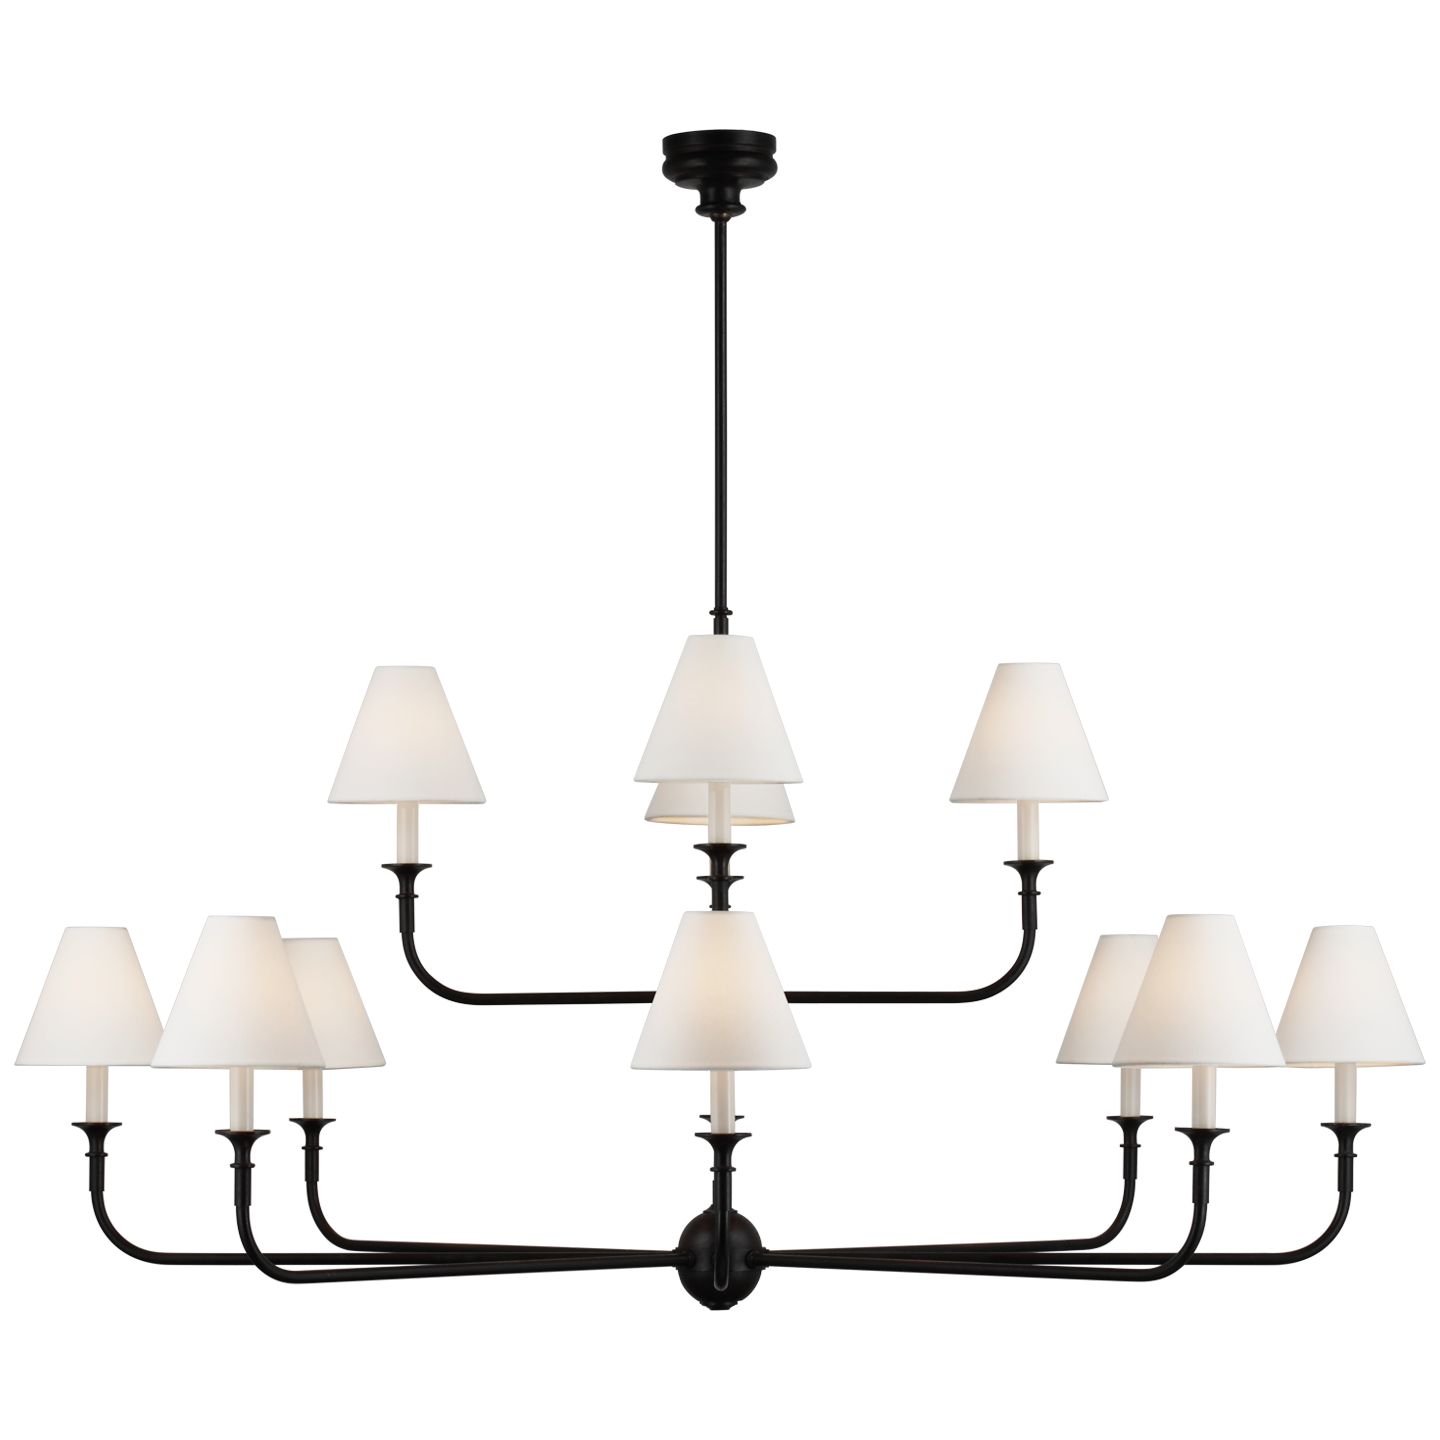 Piaf Grande Two-Tier Chandelier in Aged Iron and Ebonized Oak with Linen Shades | Visual Comfort